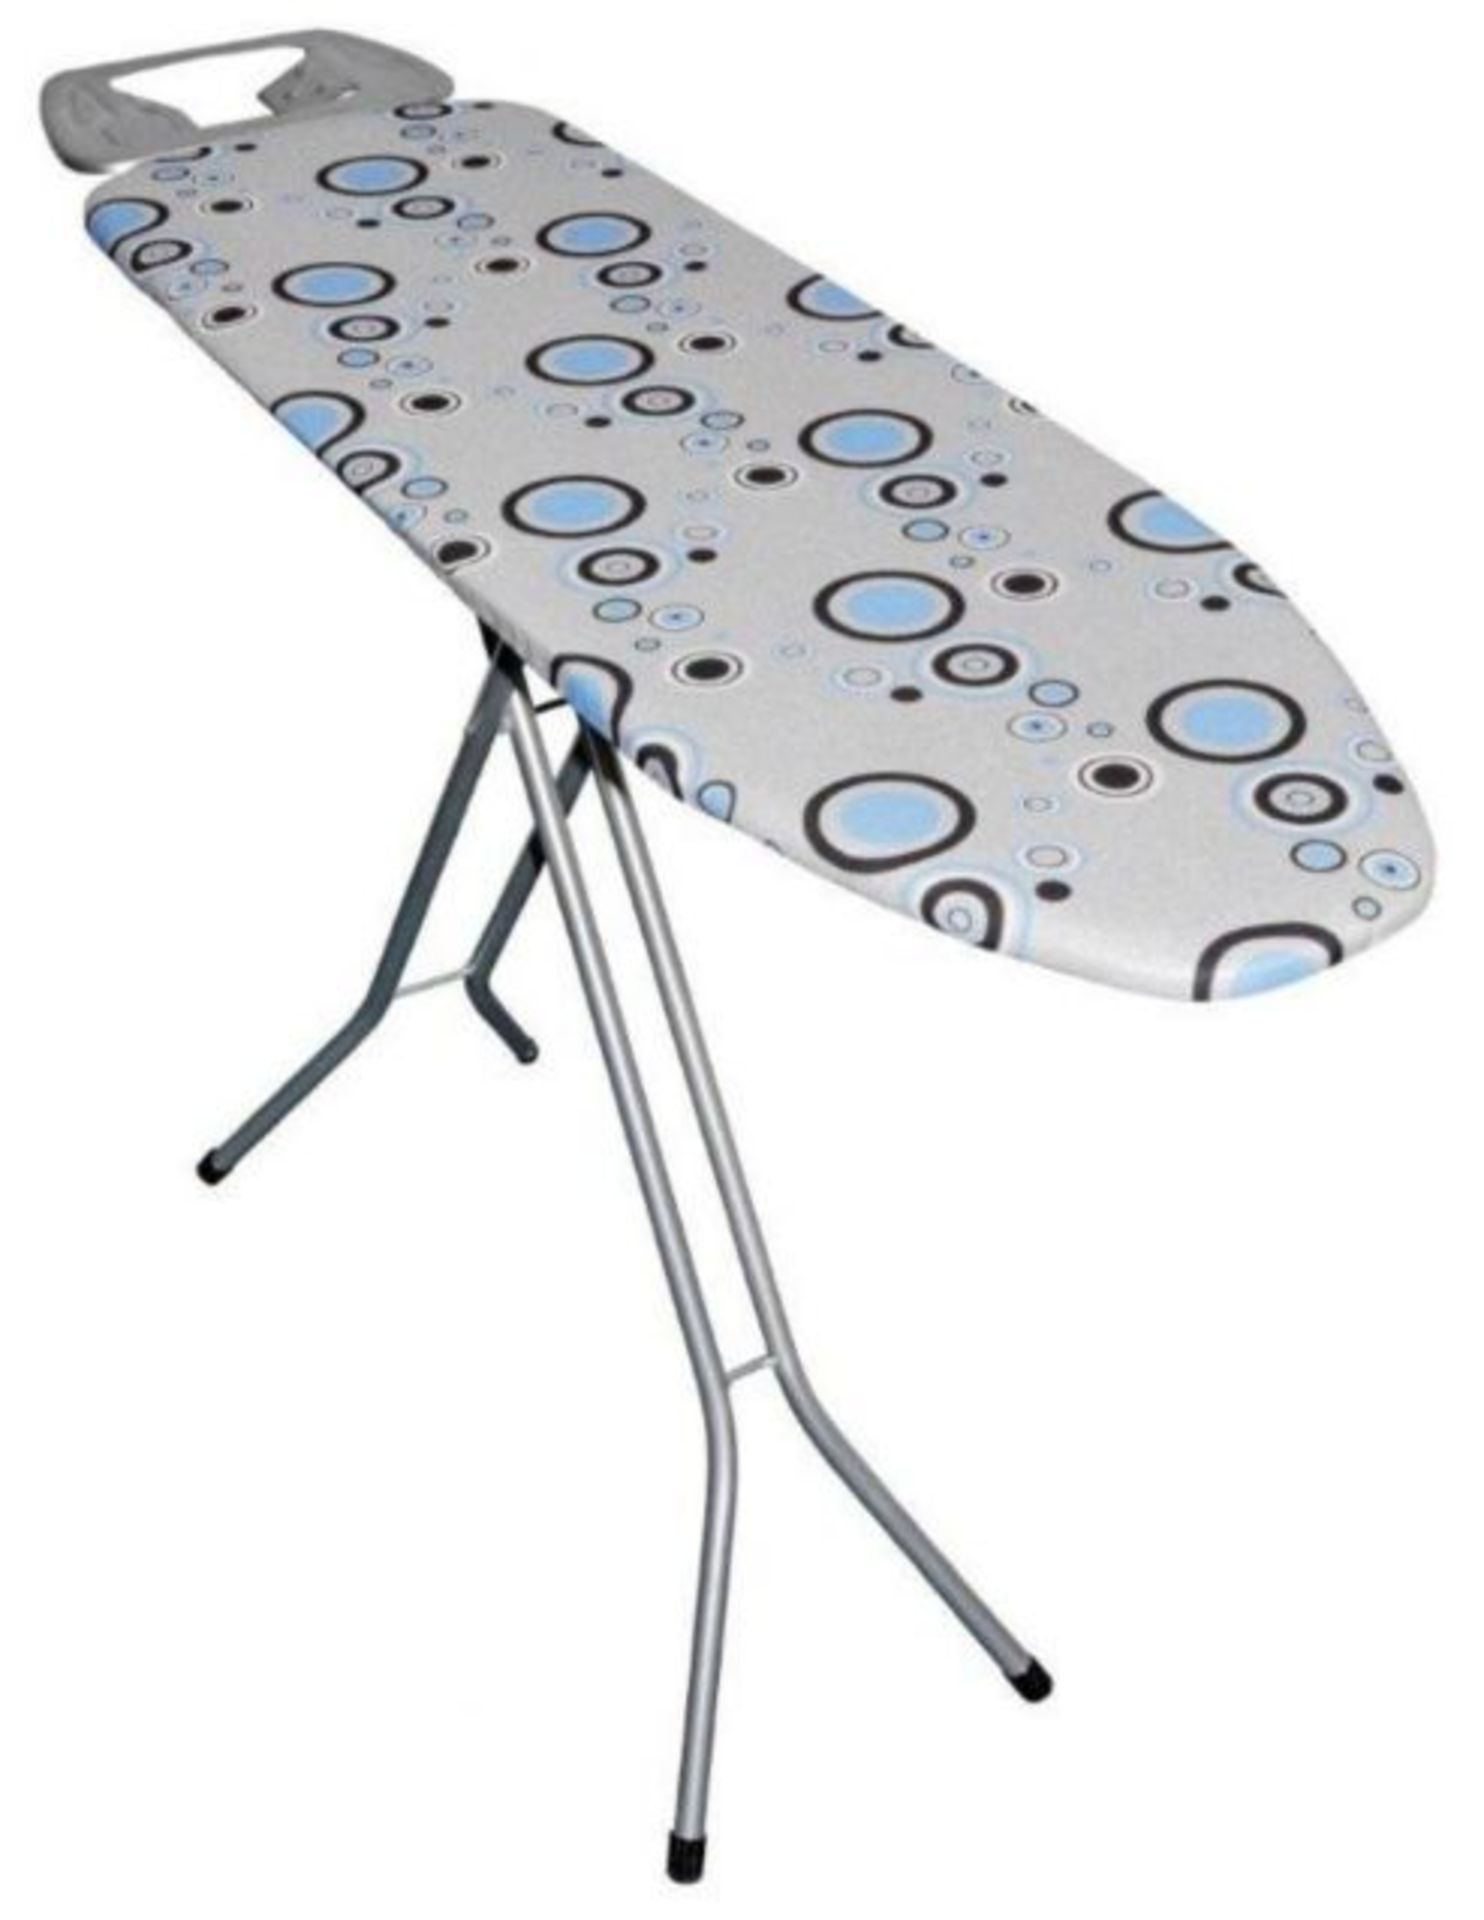 V Brand New Butler Metal Framed Ironing Board X 2 YOUR BID PRICE TO BE MULTIPLIED BY TWO